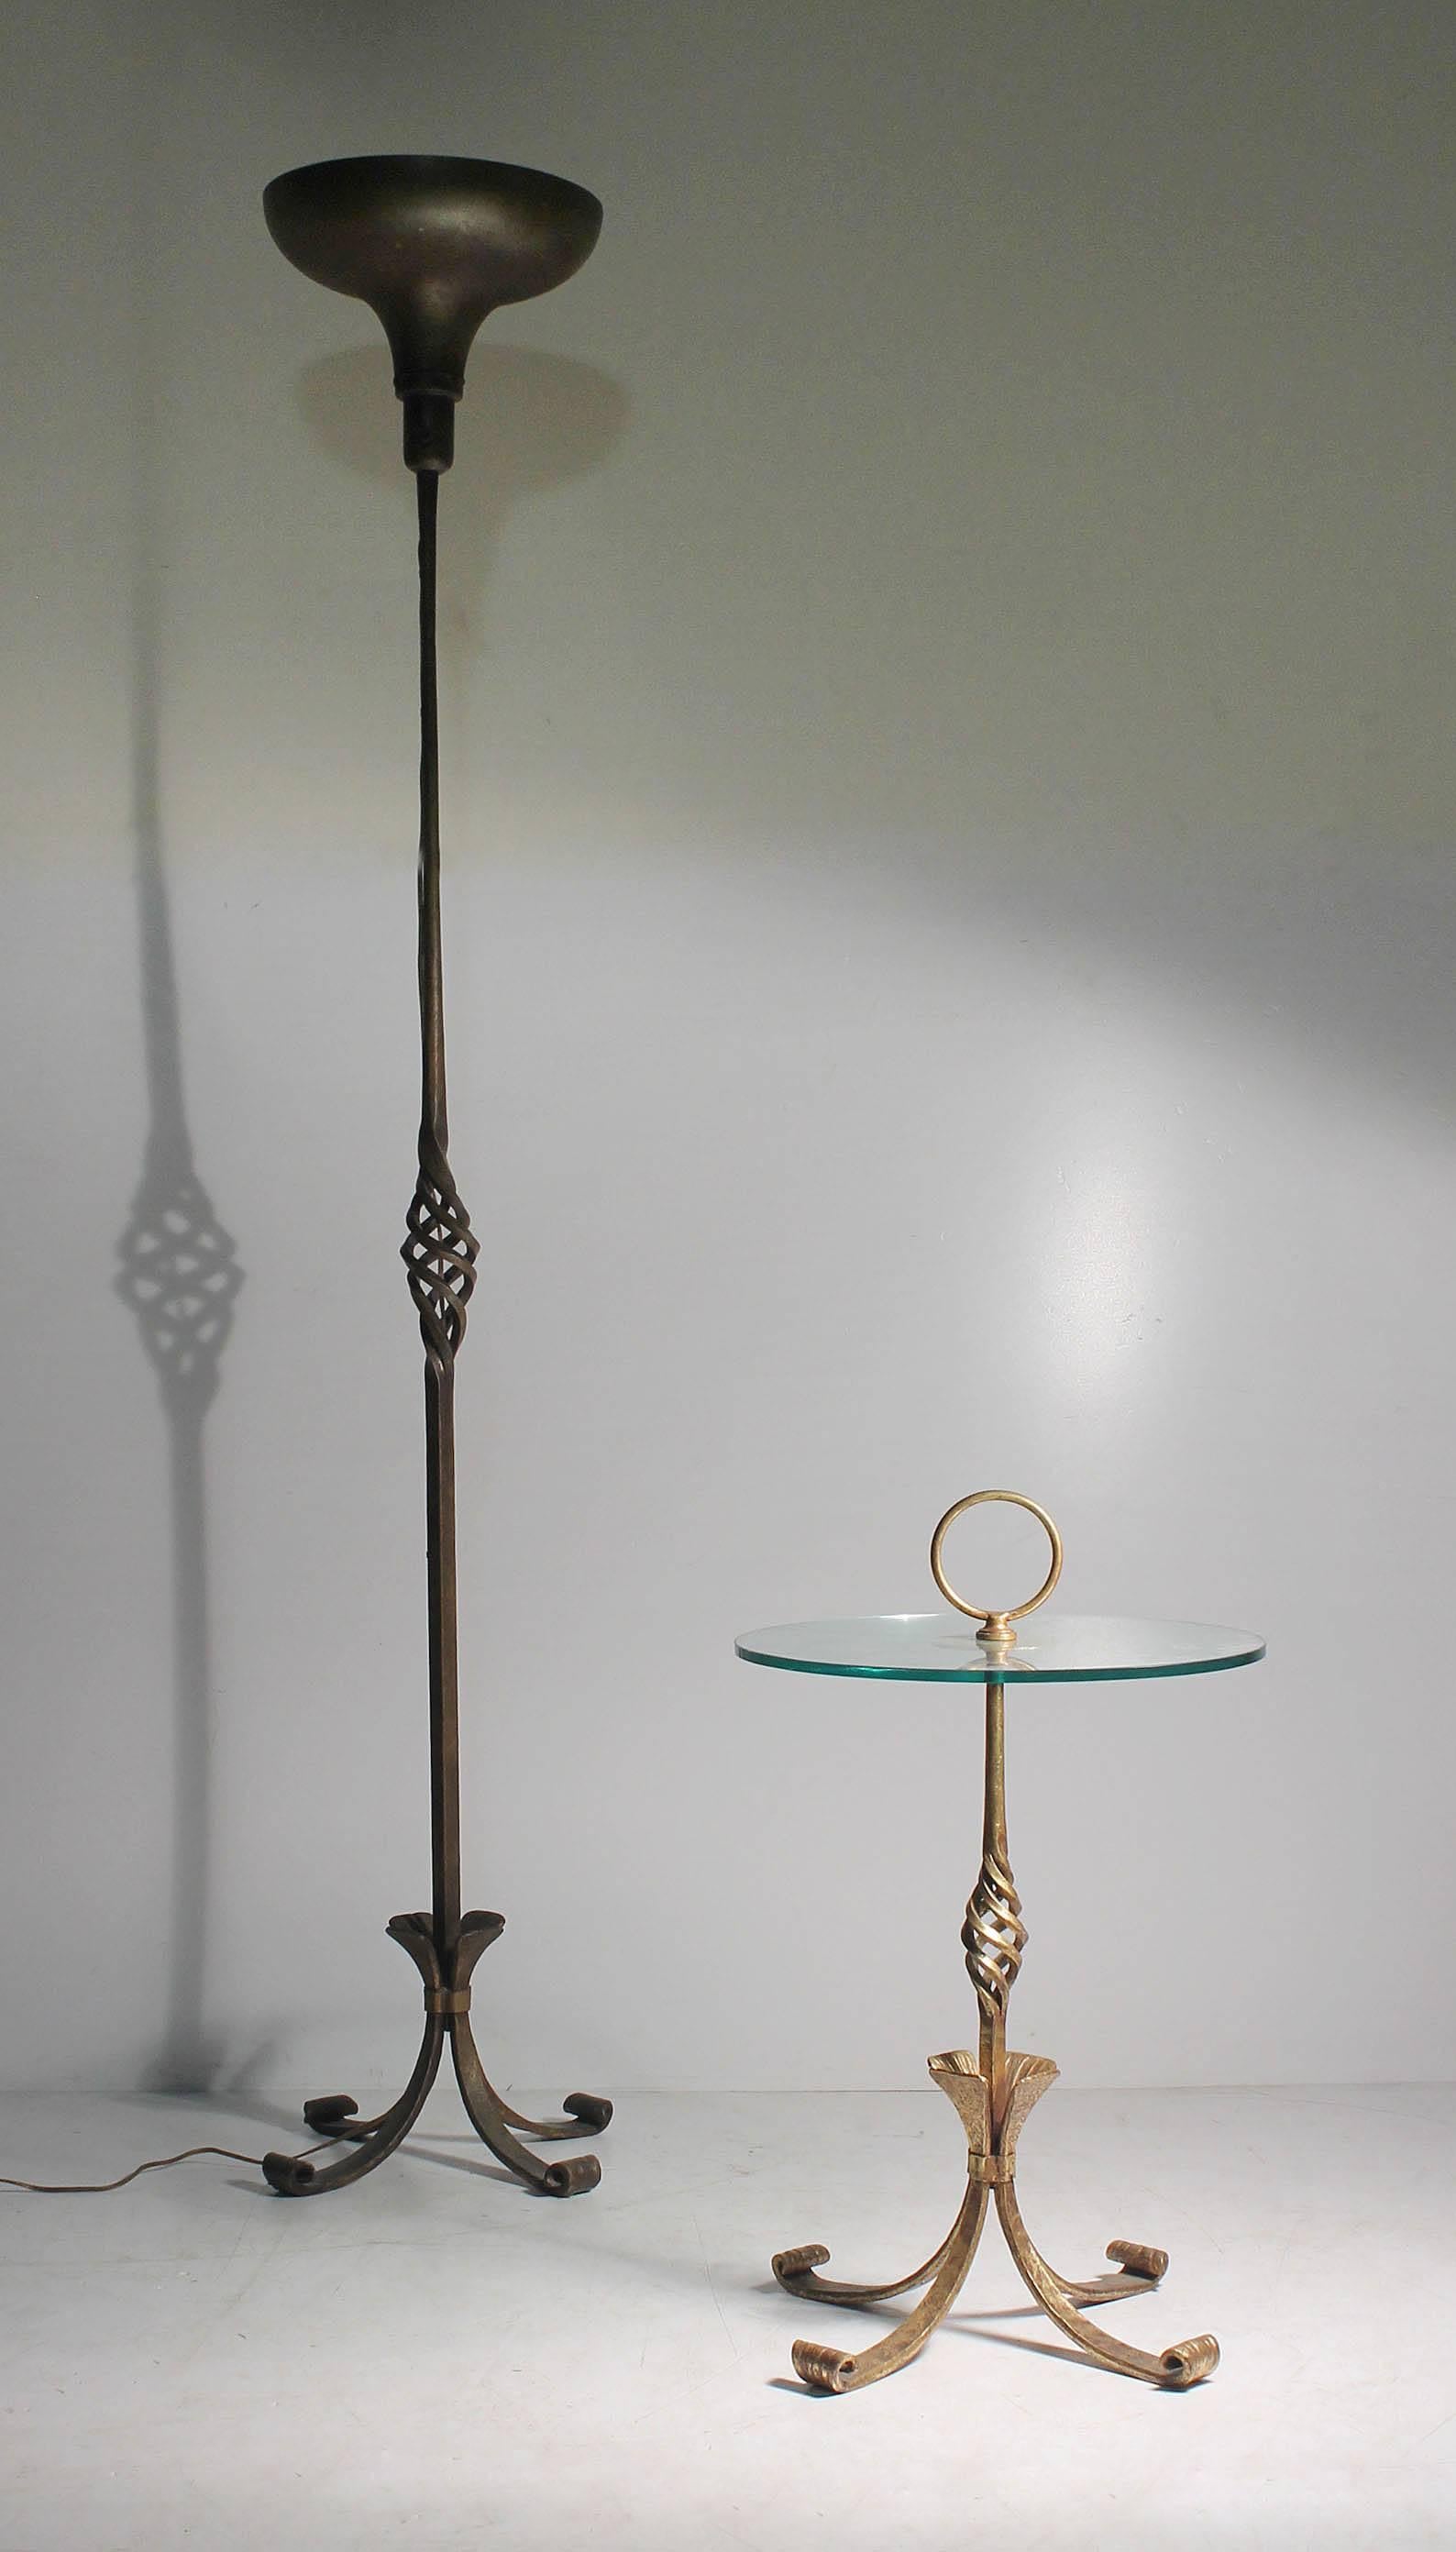 Erwin Gruen Hand-Forged Wrought Iron Gilded Torchere Floor Lamp. In the manner of French 40's wrought iron design such as Gilbert Poillerat and Raymond Subes.

Erwin Gruen, born in Berlin, Germany in 1918, renowned iron worker, Erwin Gruen